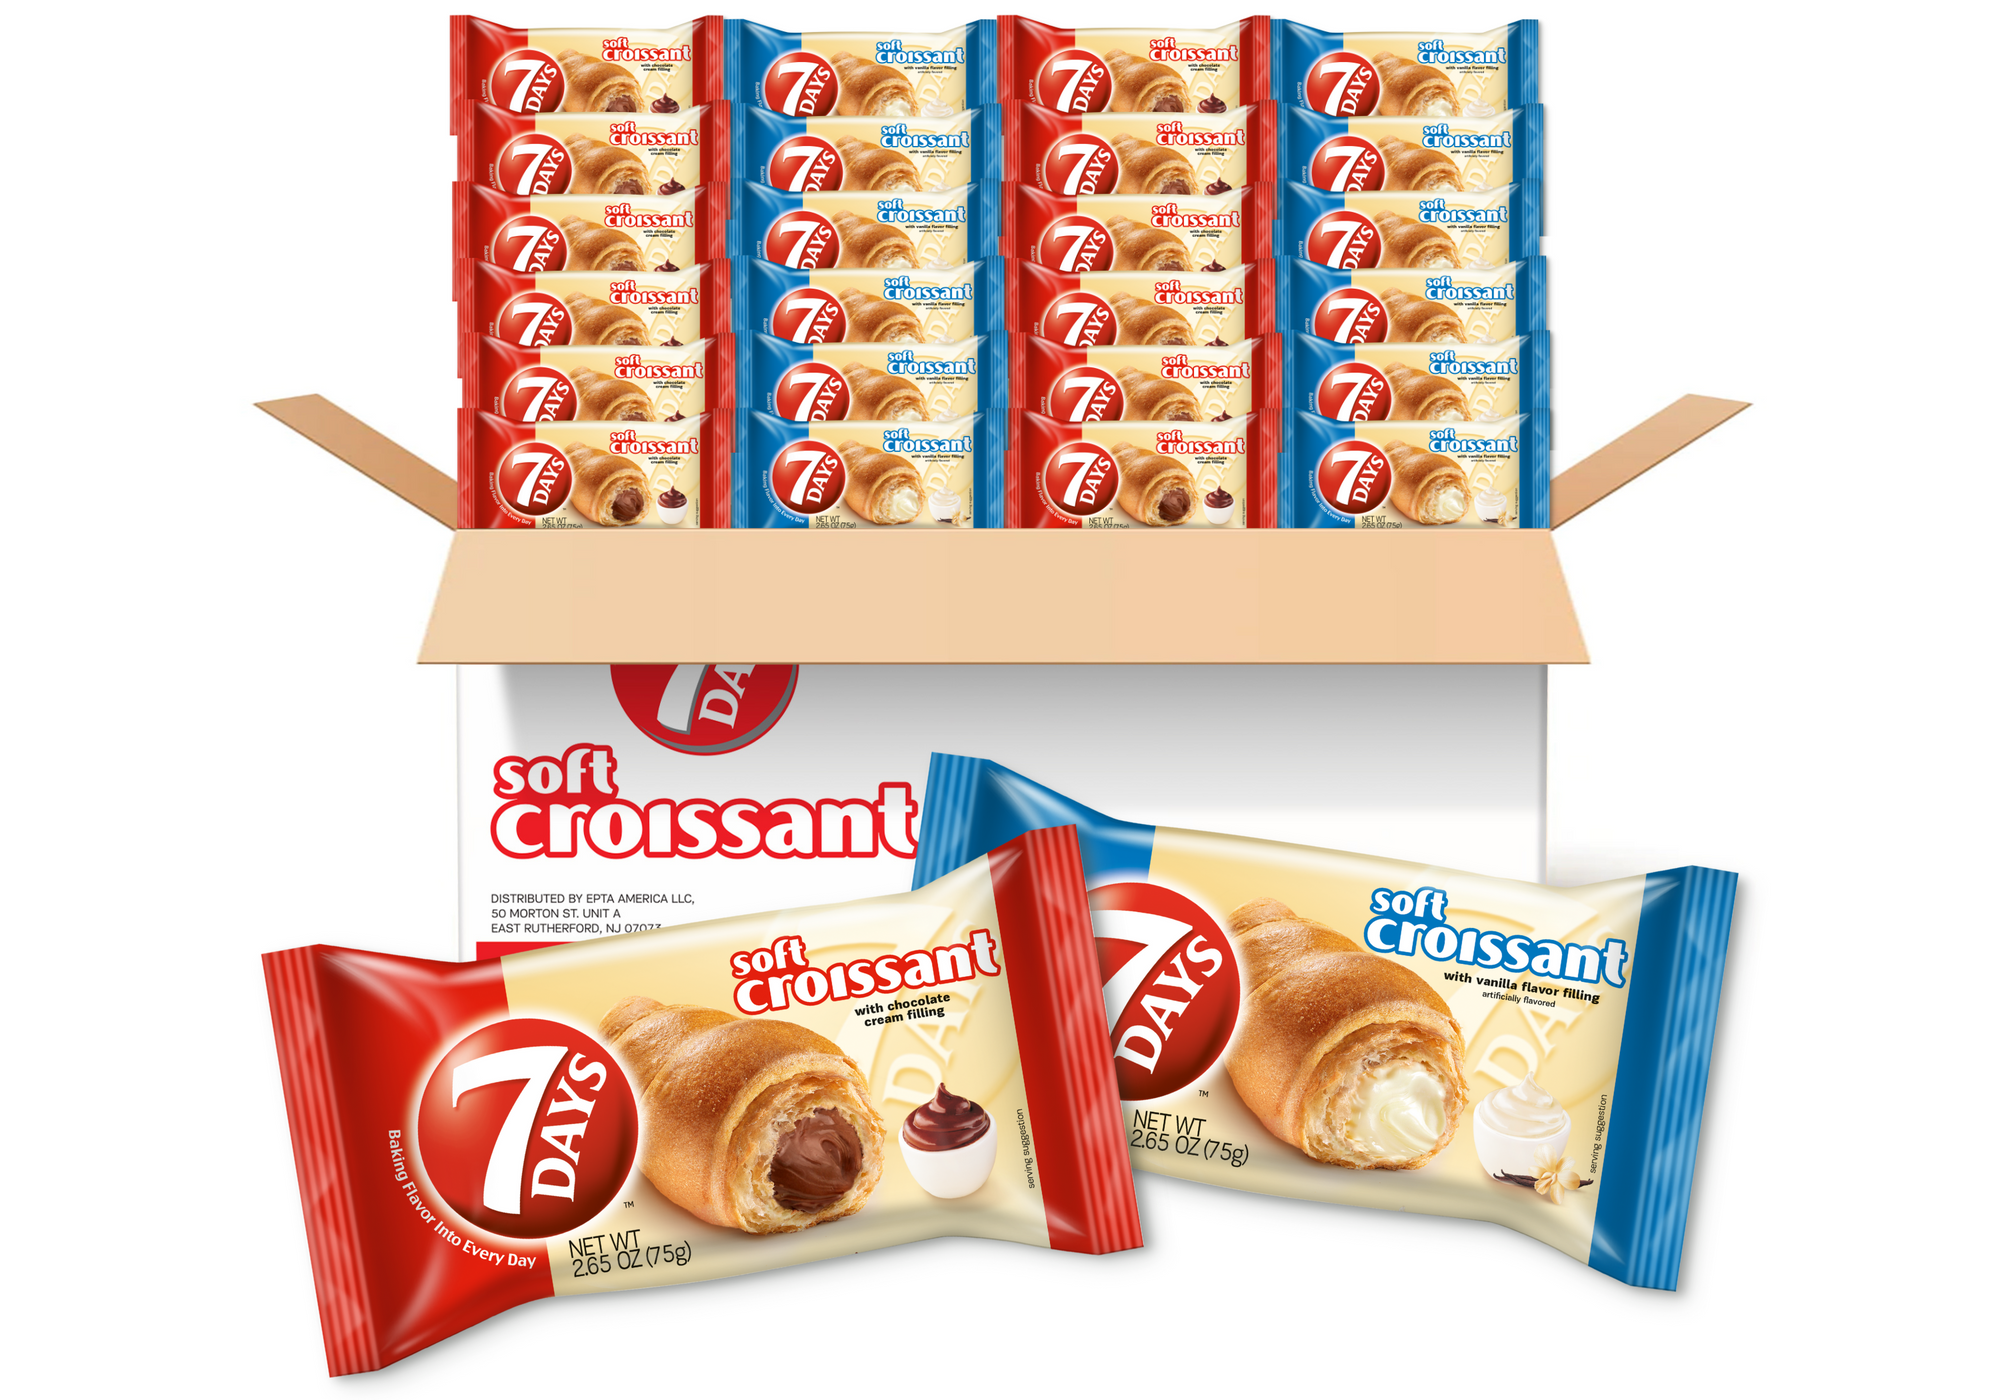 Soft Croissant, 2 Flavor Variety Pack: 12 Chocolate, 12 Vanilla (2.65oz, Pack of 24)